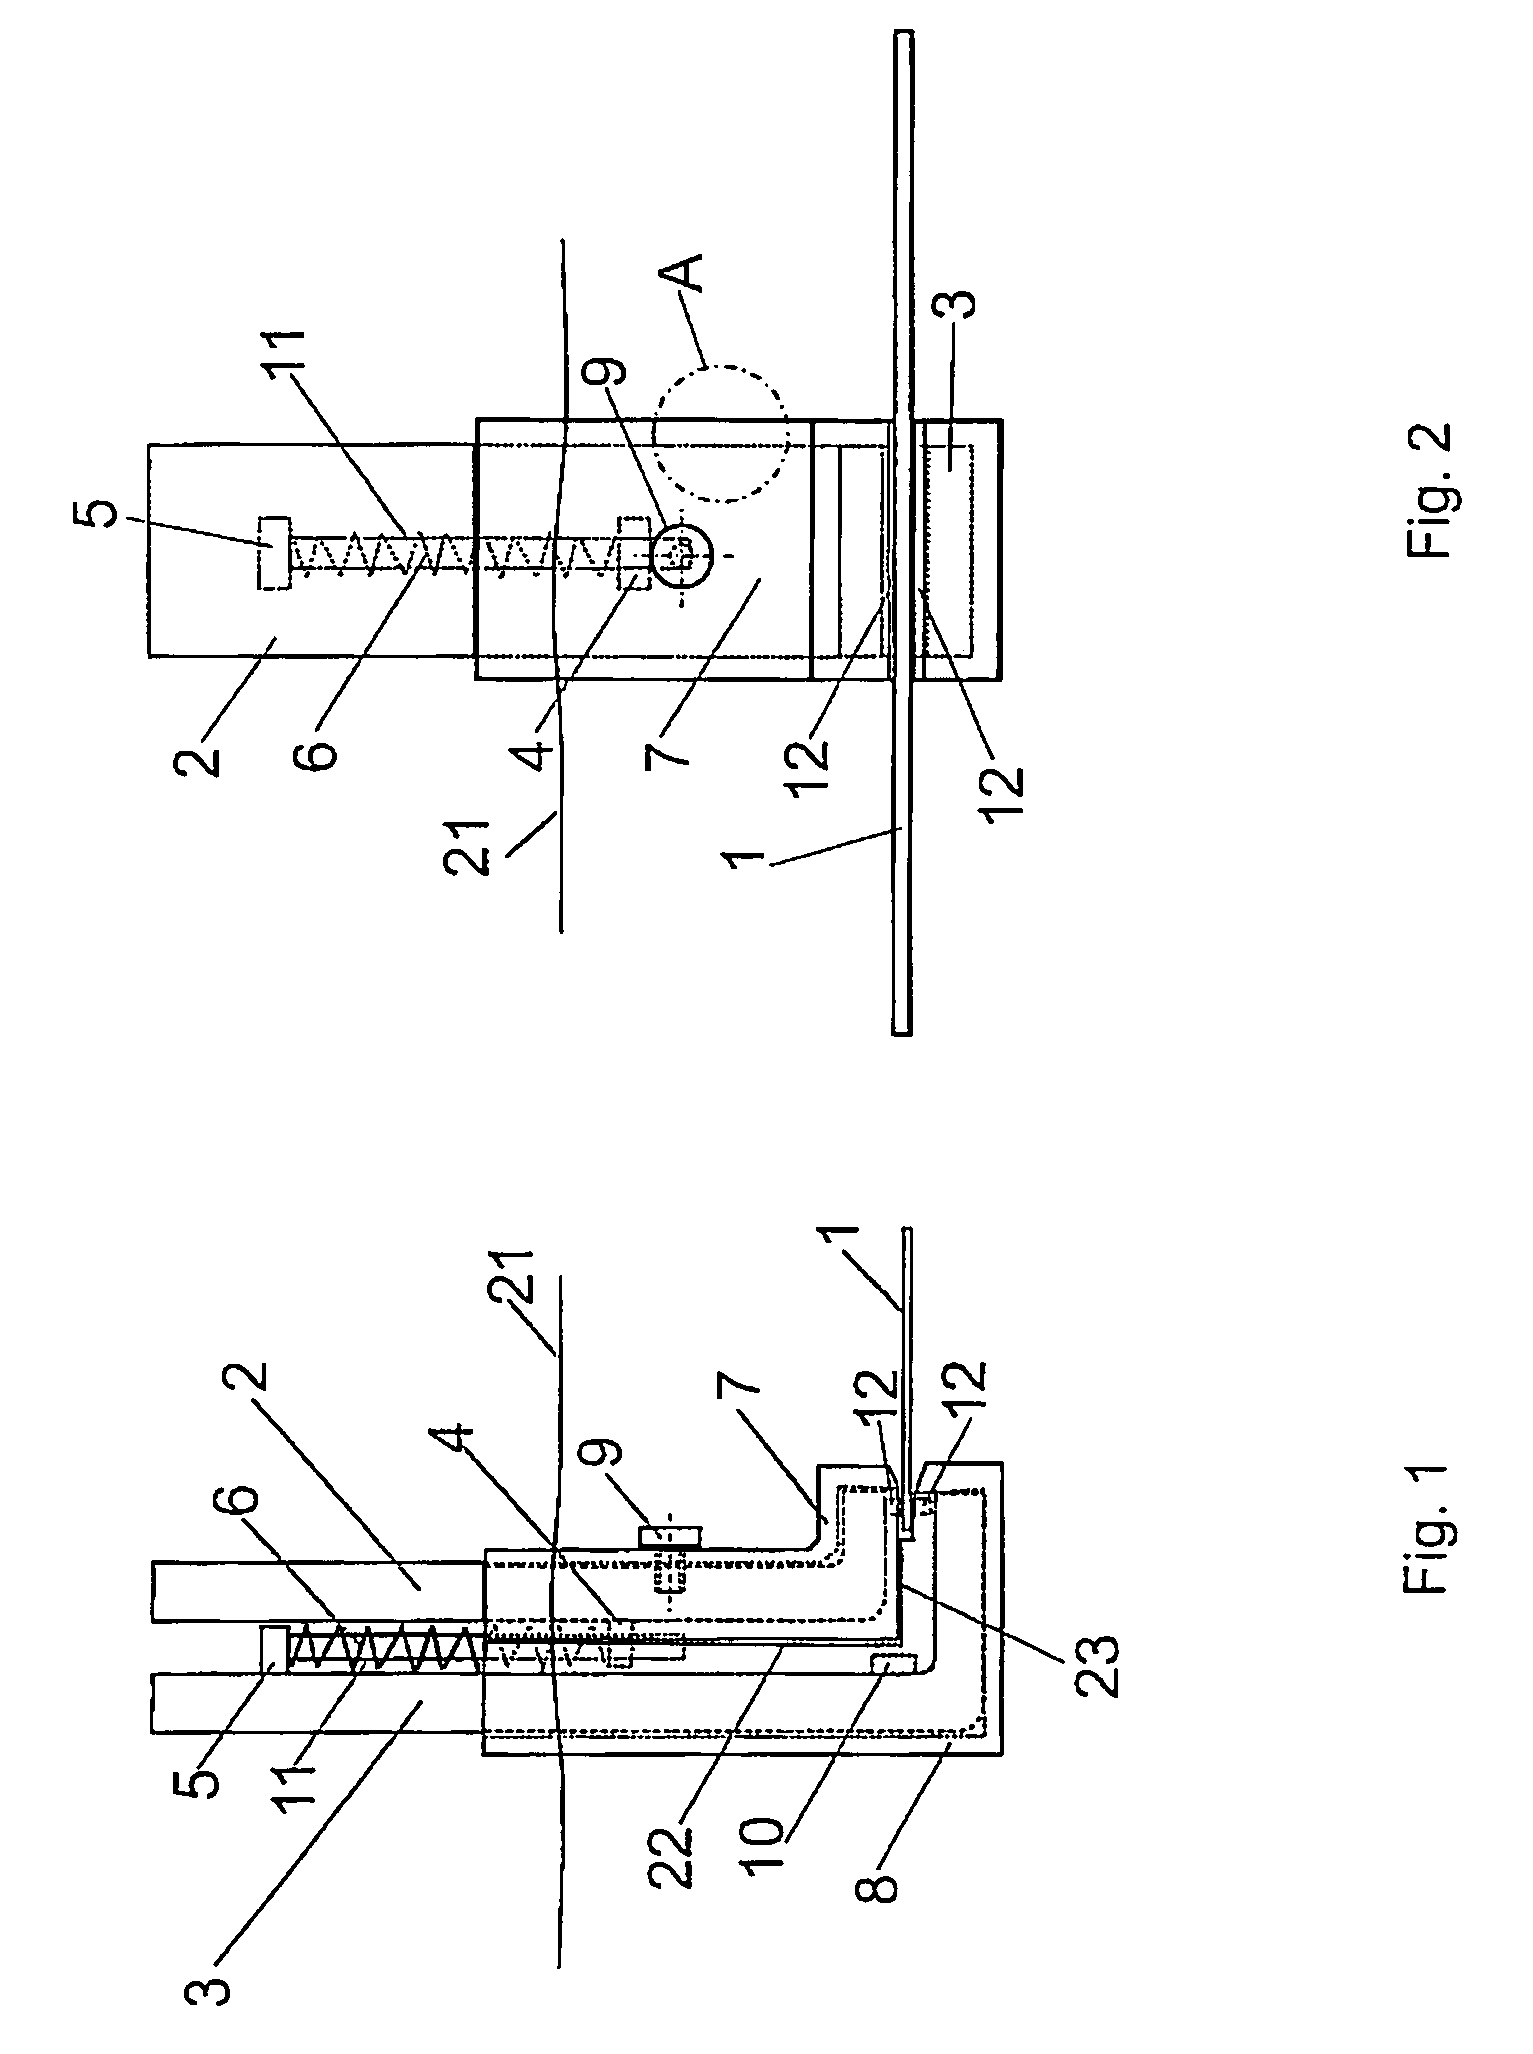 Power supply device in a device for electrochemical treatment